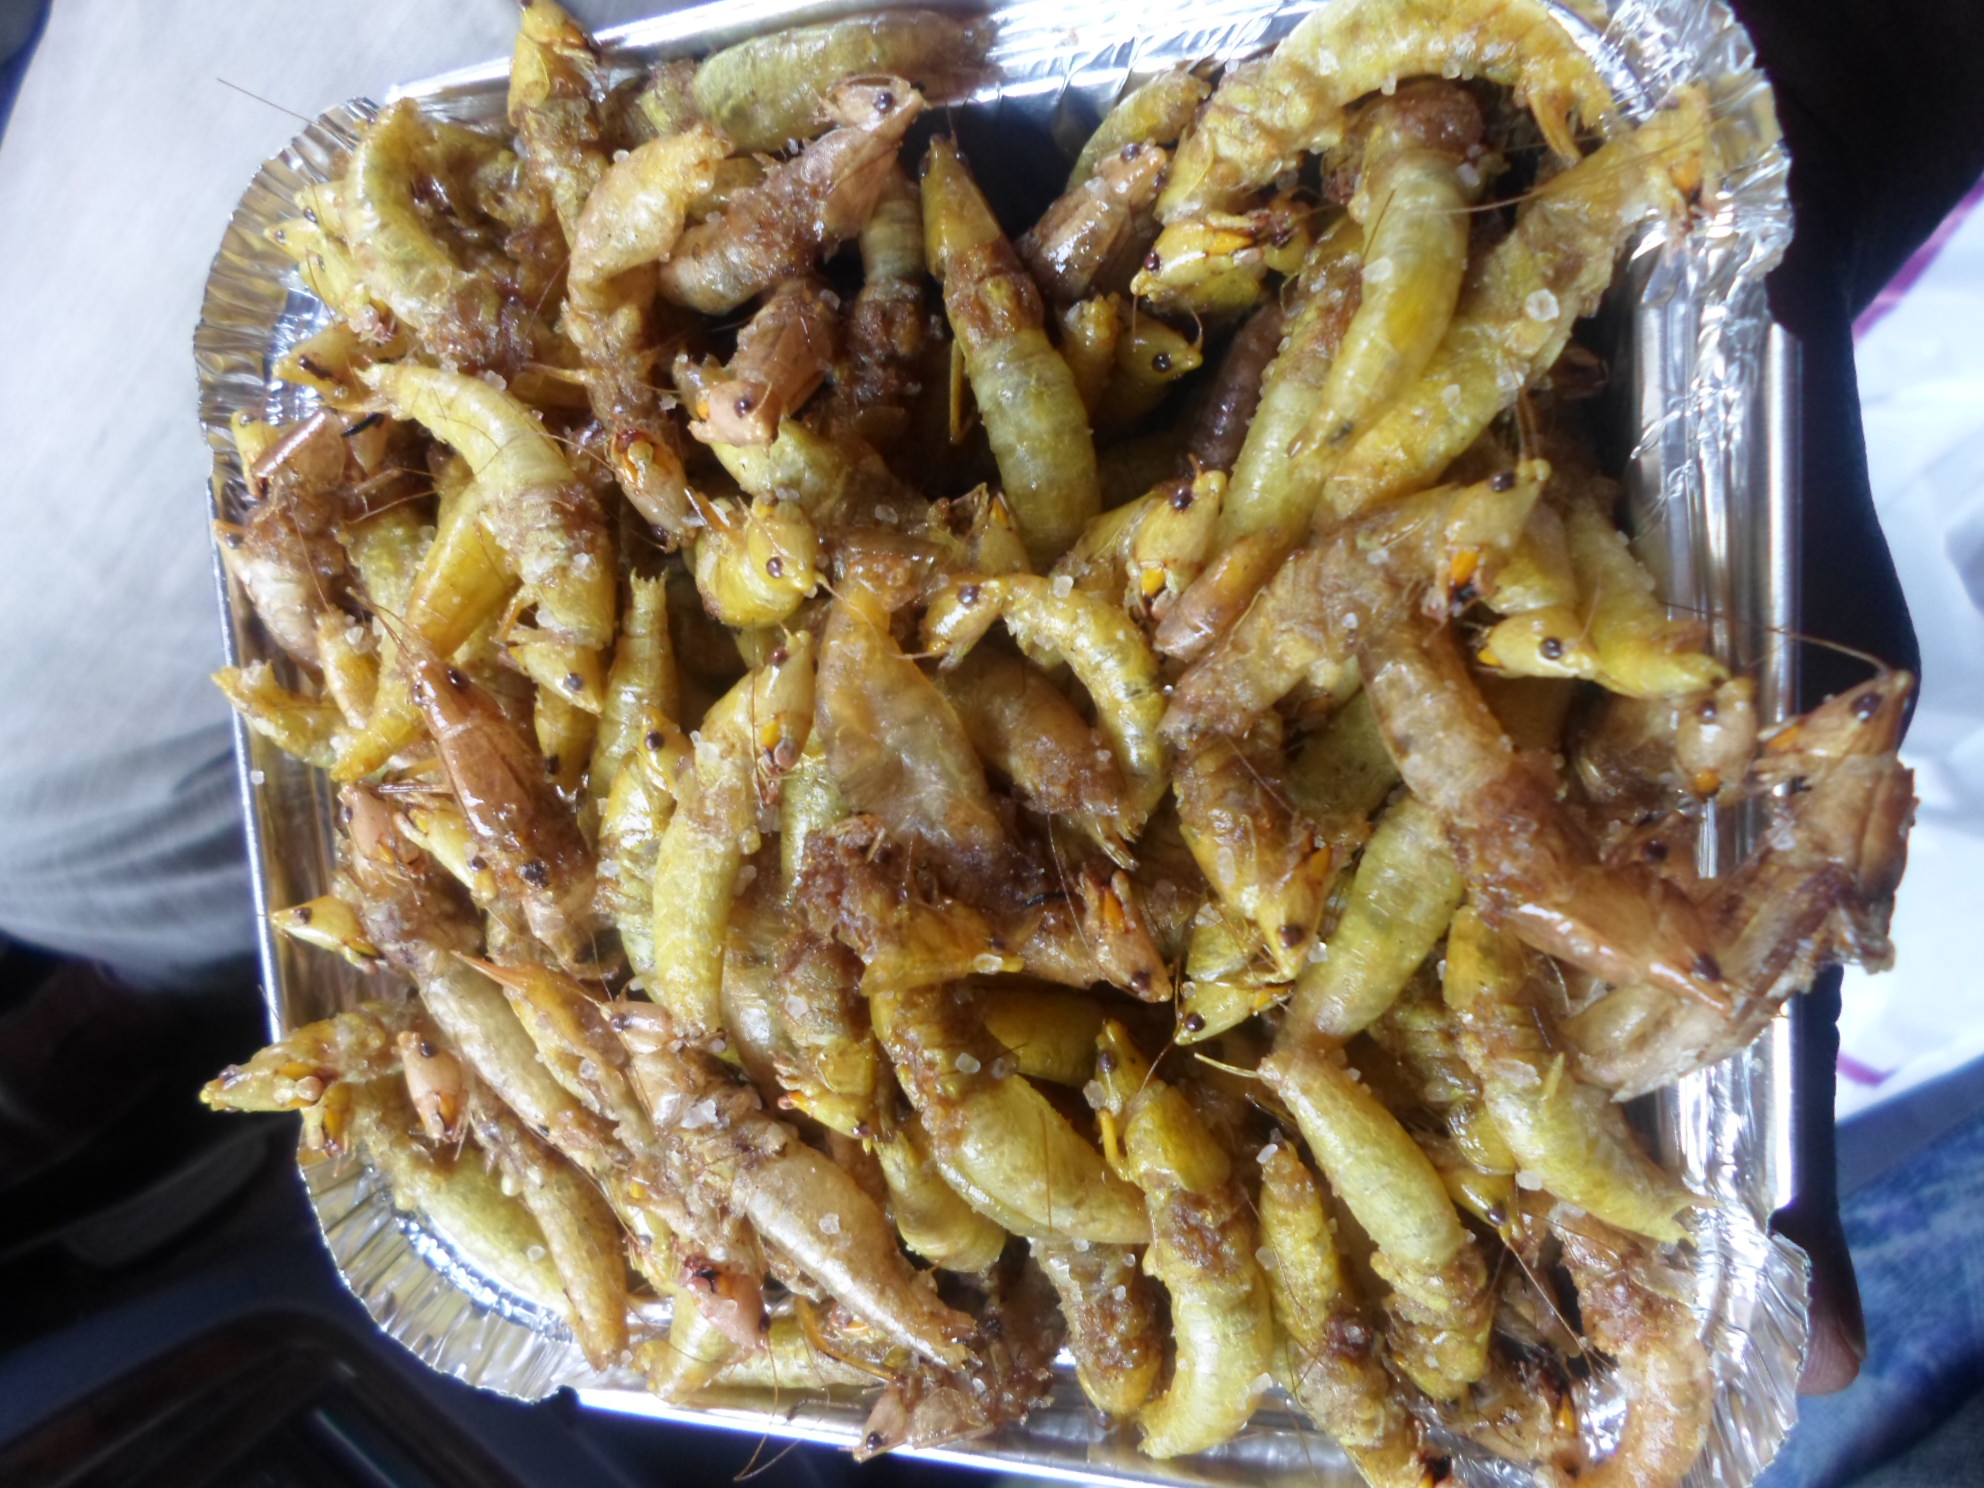 A close up of fried nsenene